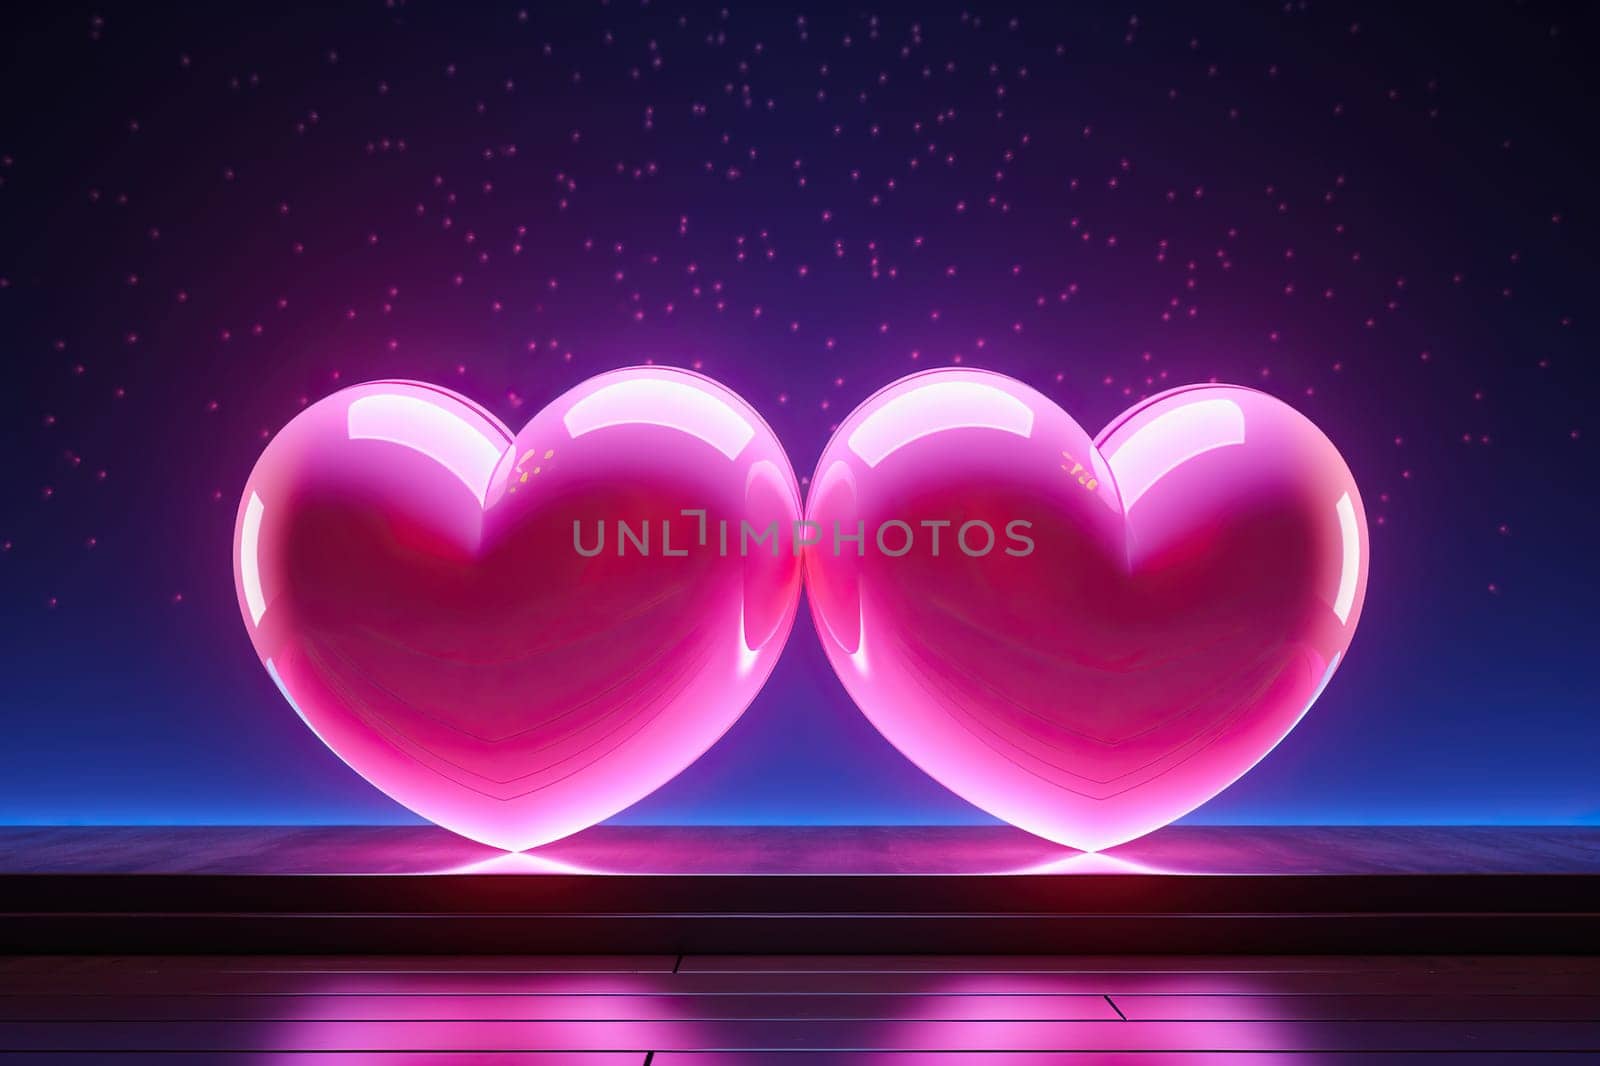 Two large pink hearts with a neon glow on a blue background. Valentine's Day concept.